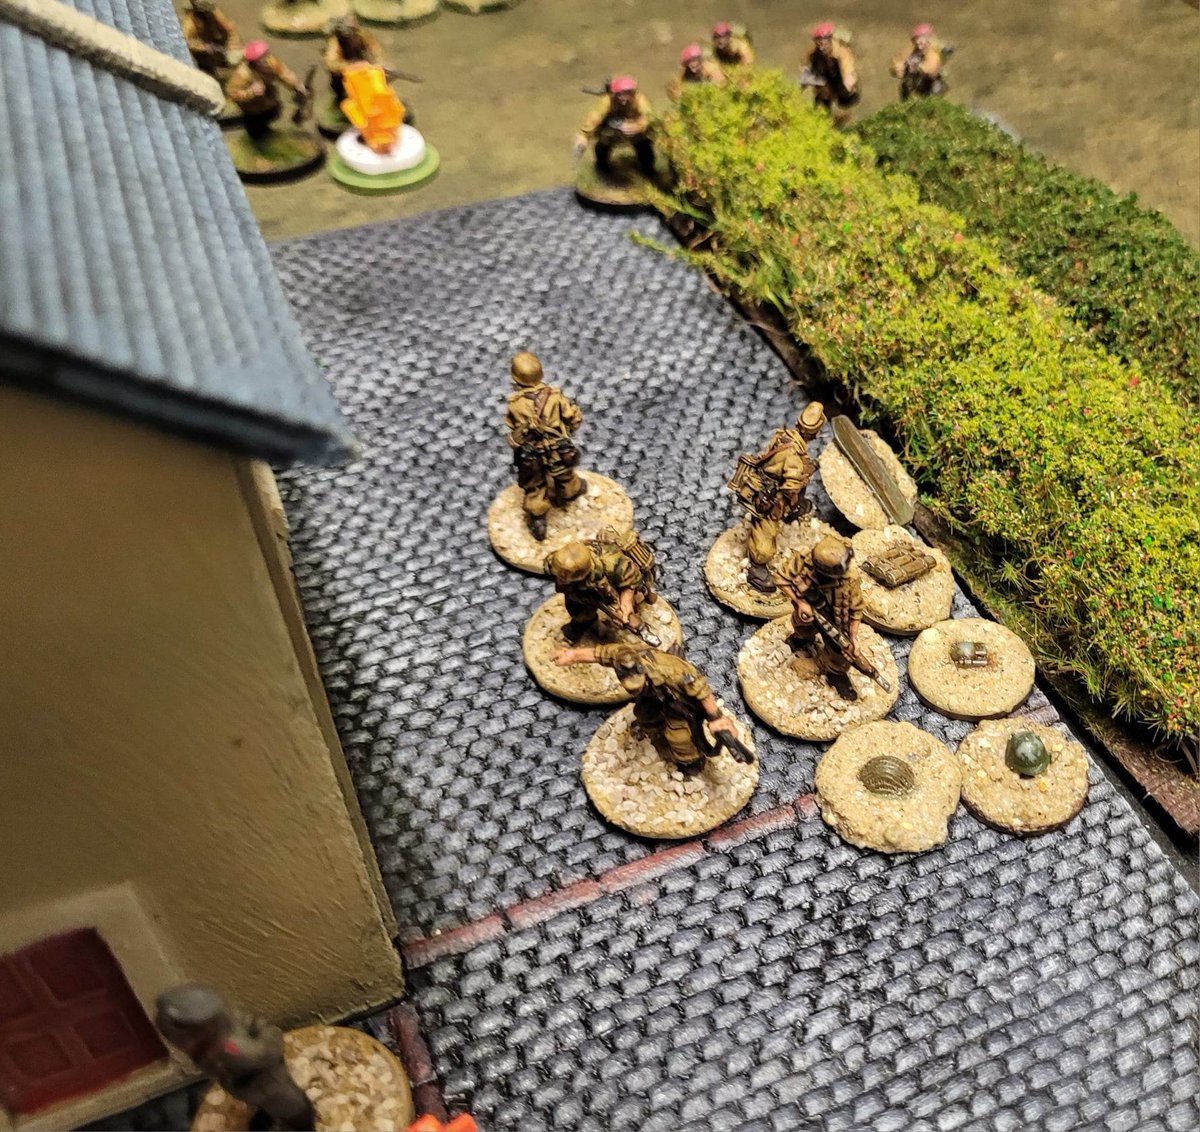 It was Fun playing Bolt action again last night. The game ended in a draw. #warlordgames #boltaction